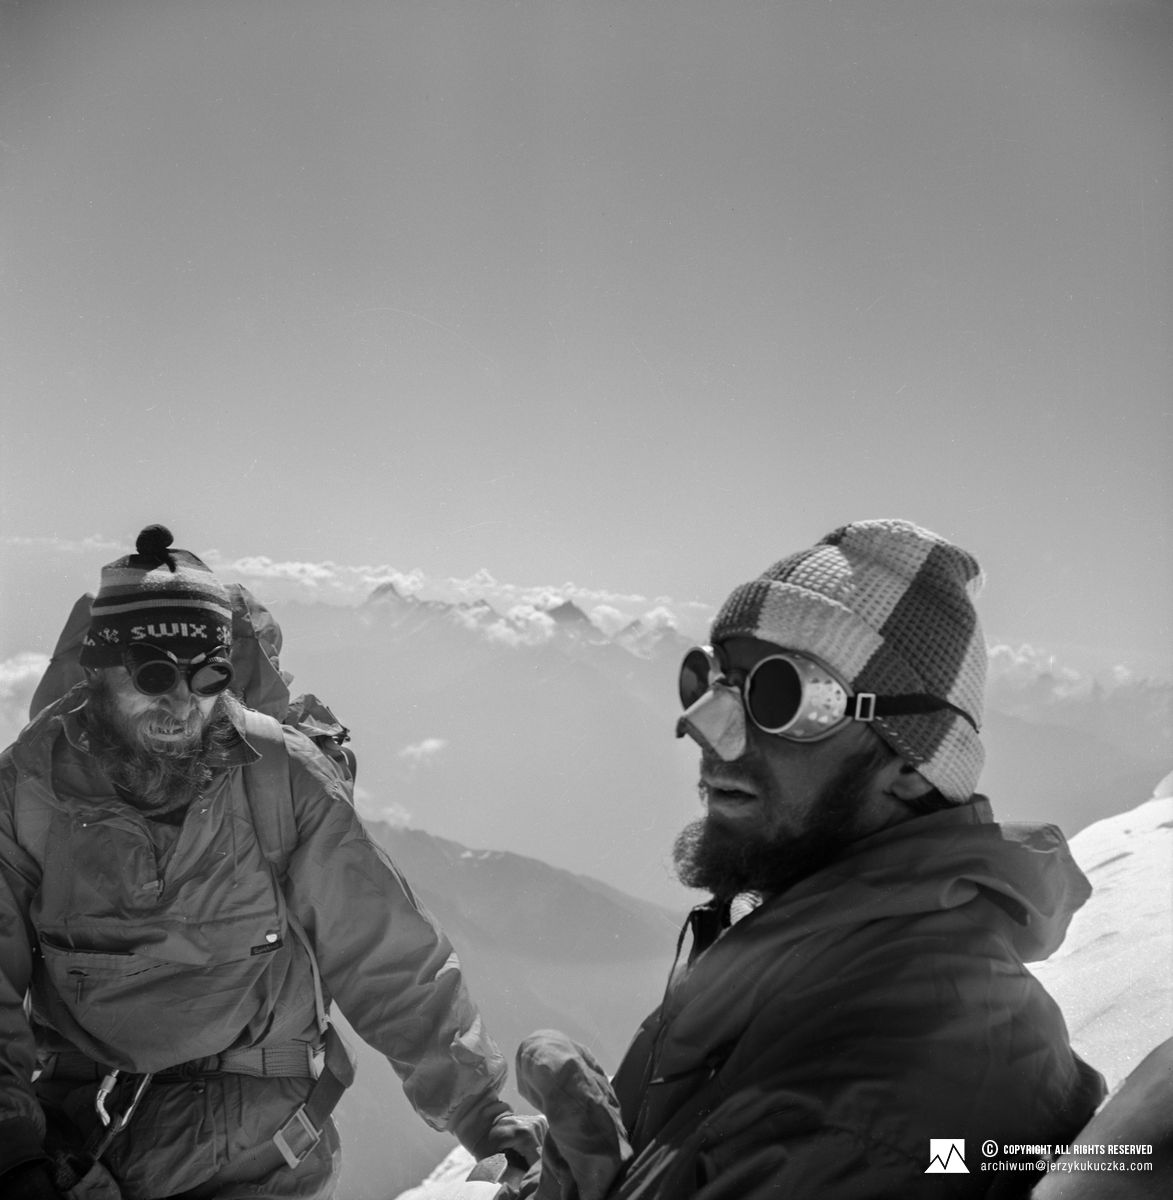 Participants of the expedition near the summit of Tirich Mir East. From the left: Tadeusz Piotrowski and Jerzy Kukuczka.